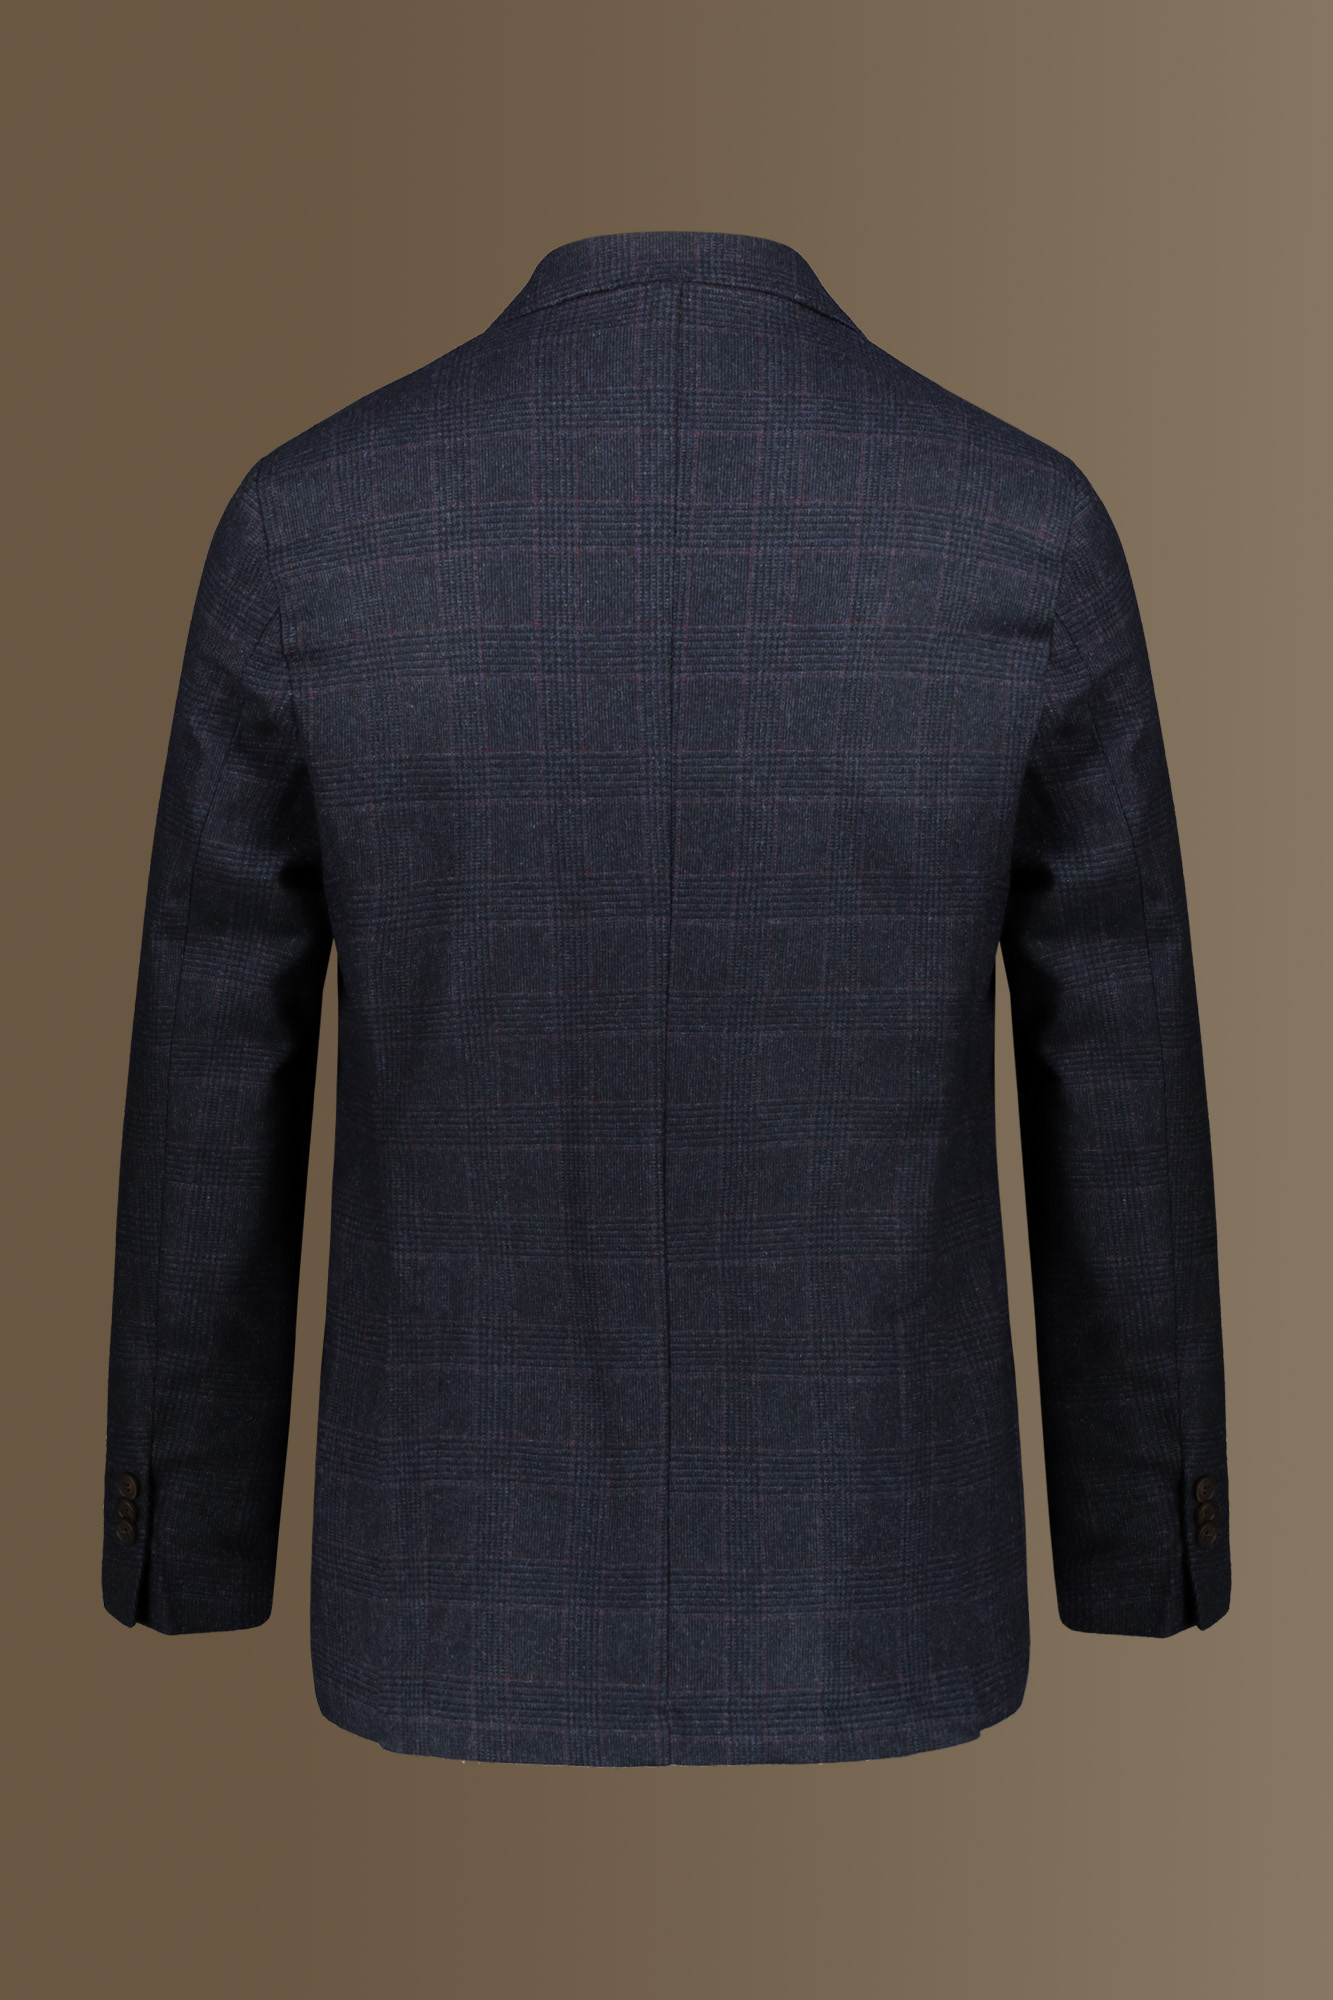 Single breasted Jaket, wool blend, fheck design. Made in italy image number null